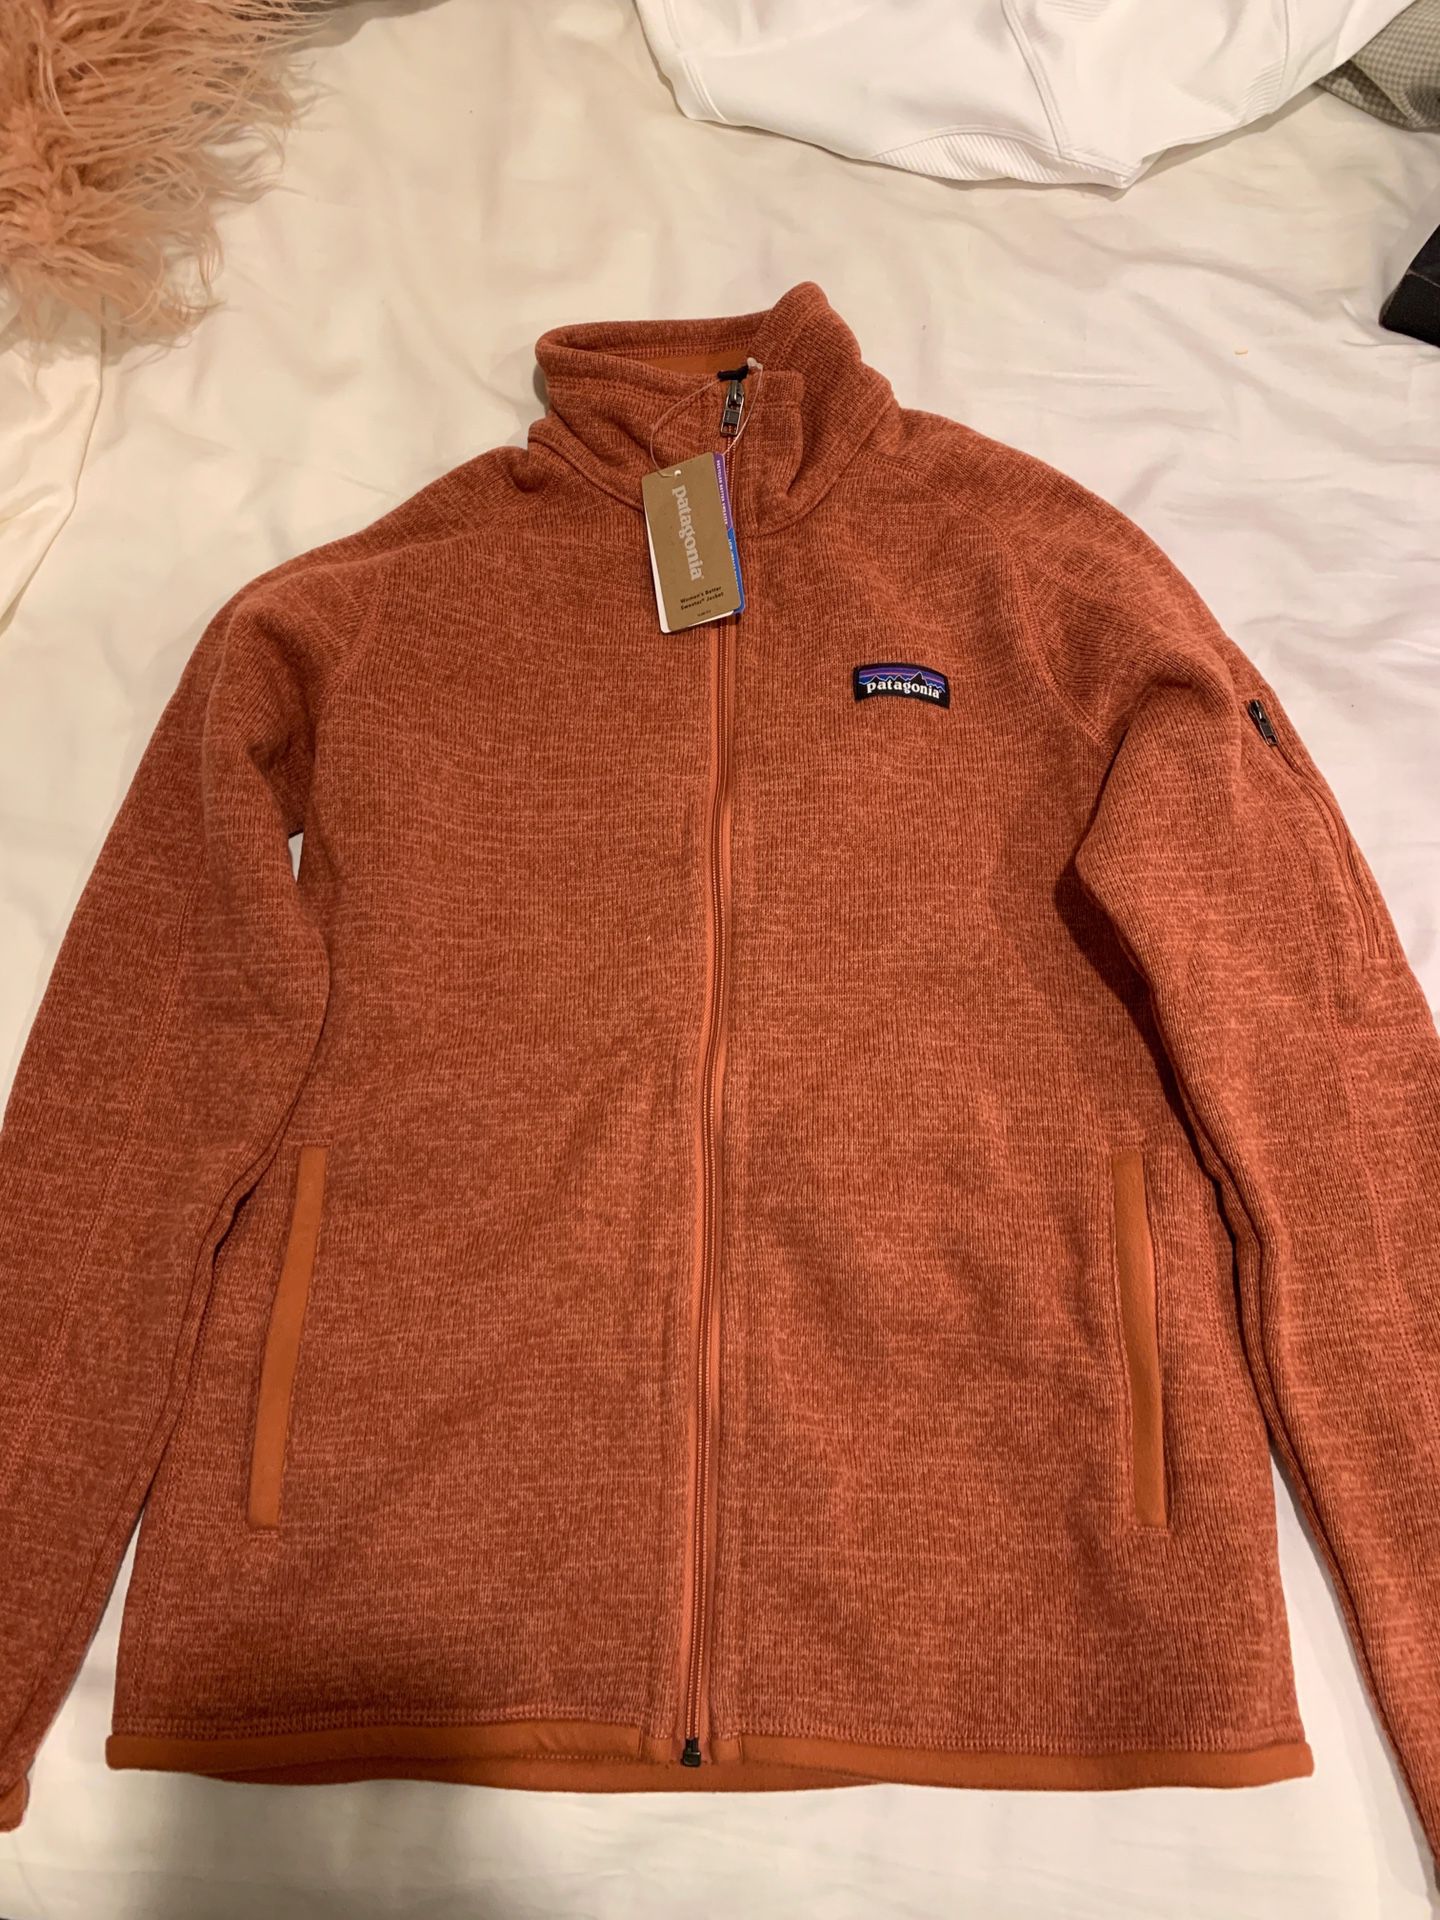 Patagonia small women’s better sweater jacket